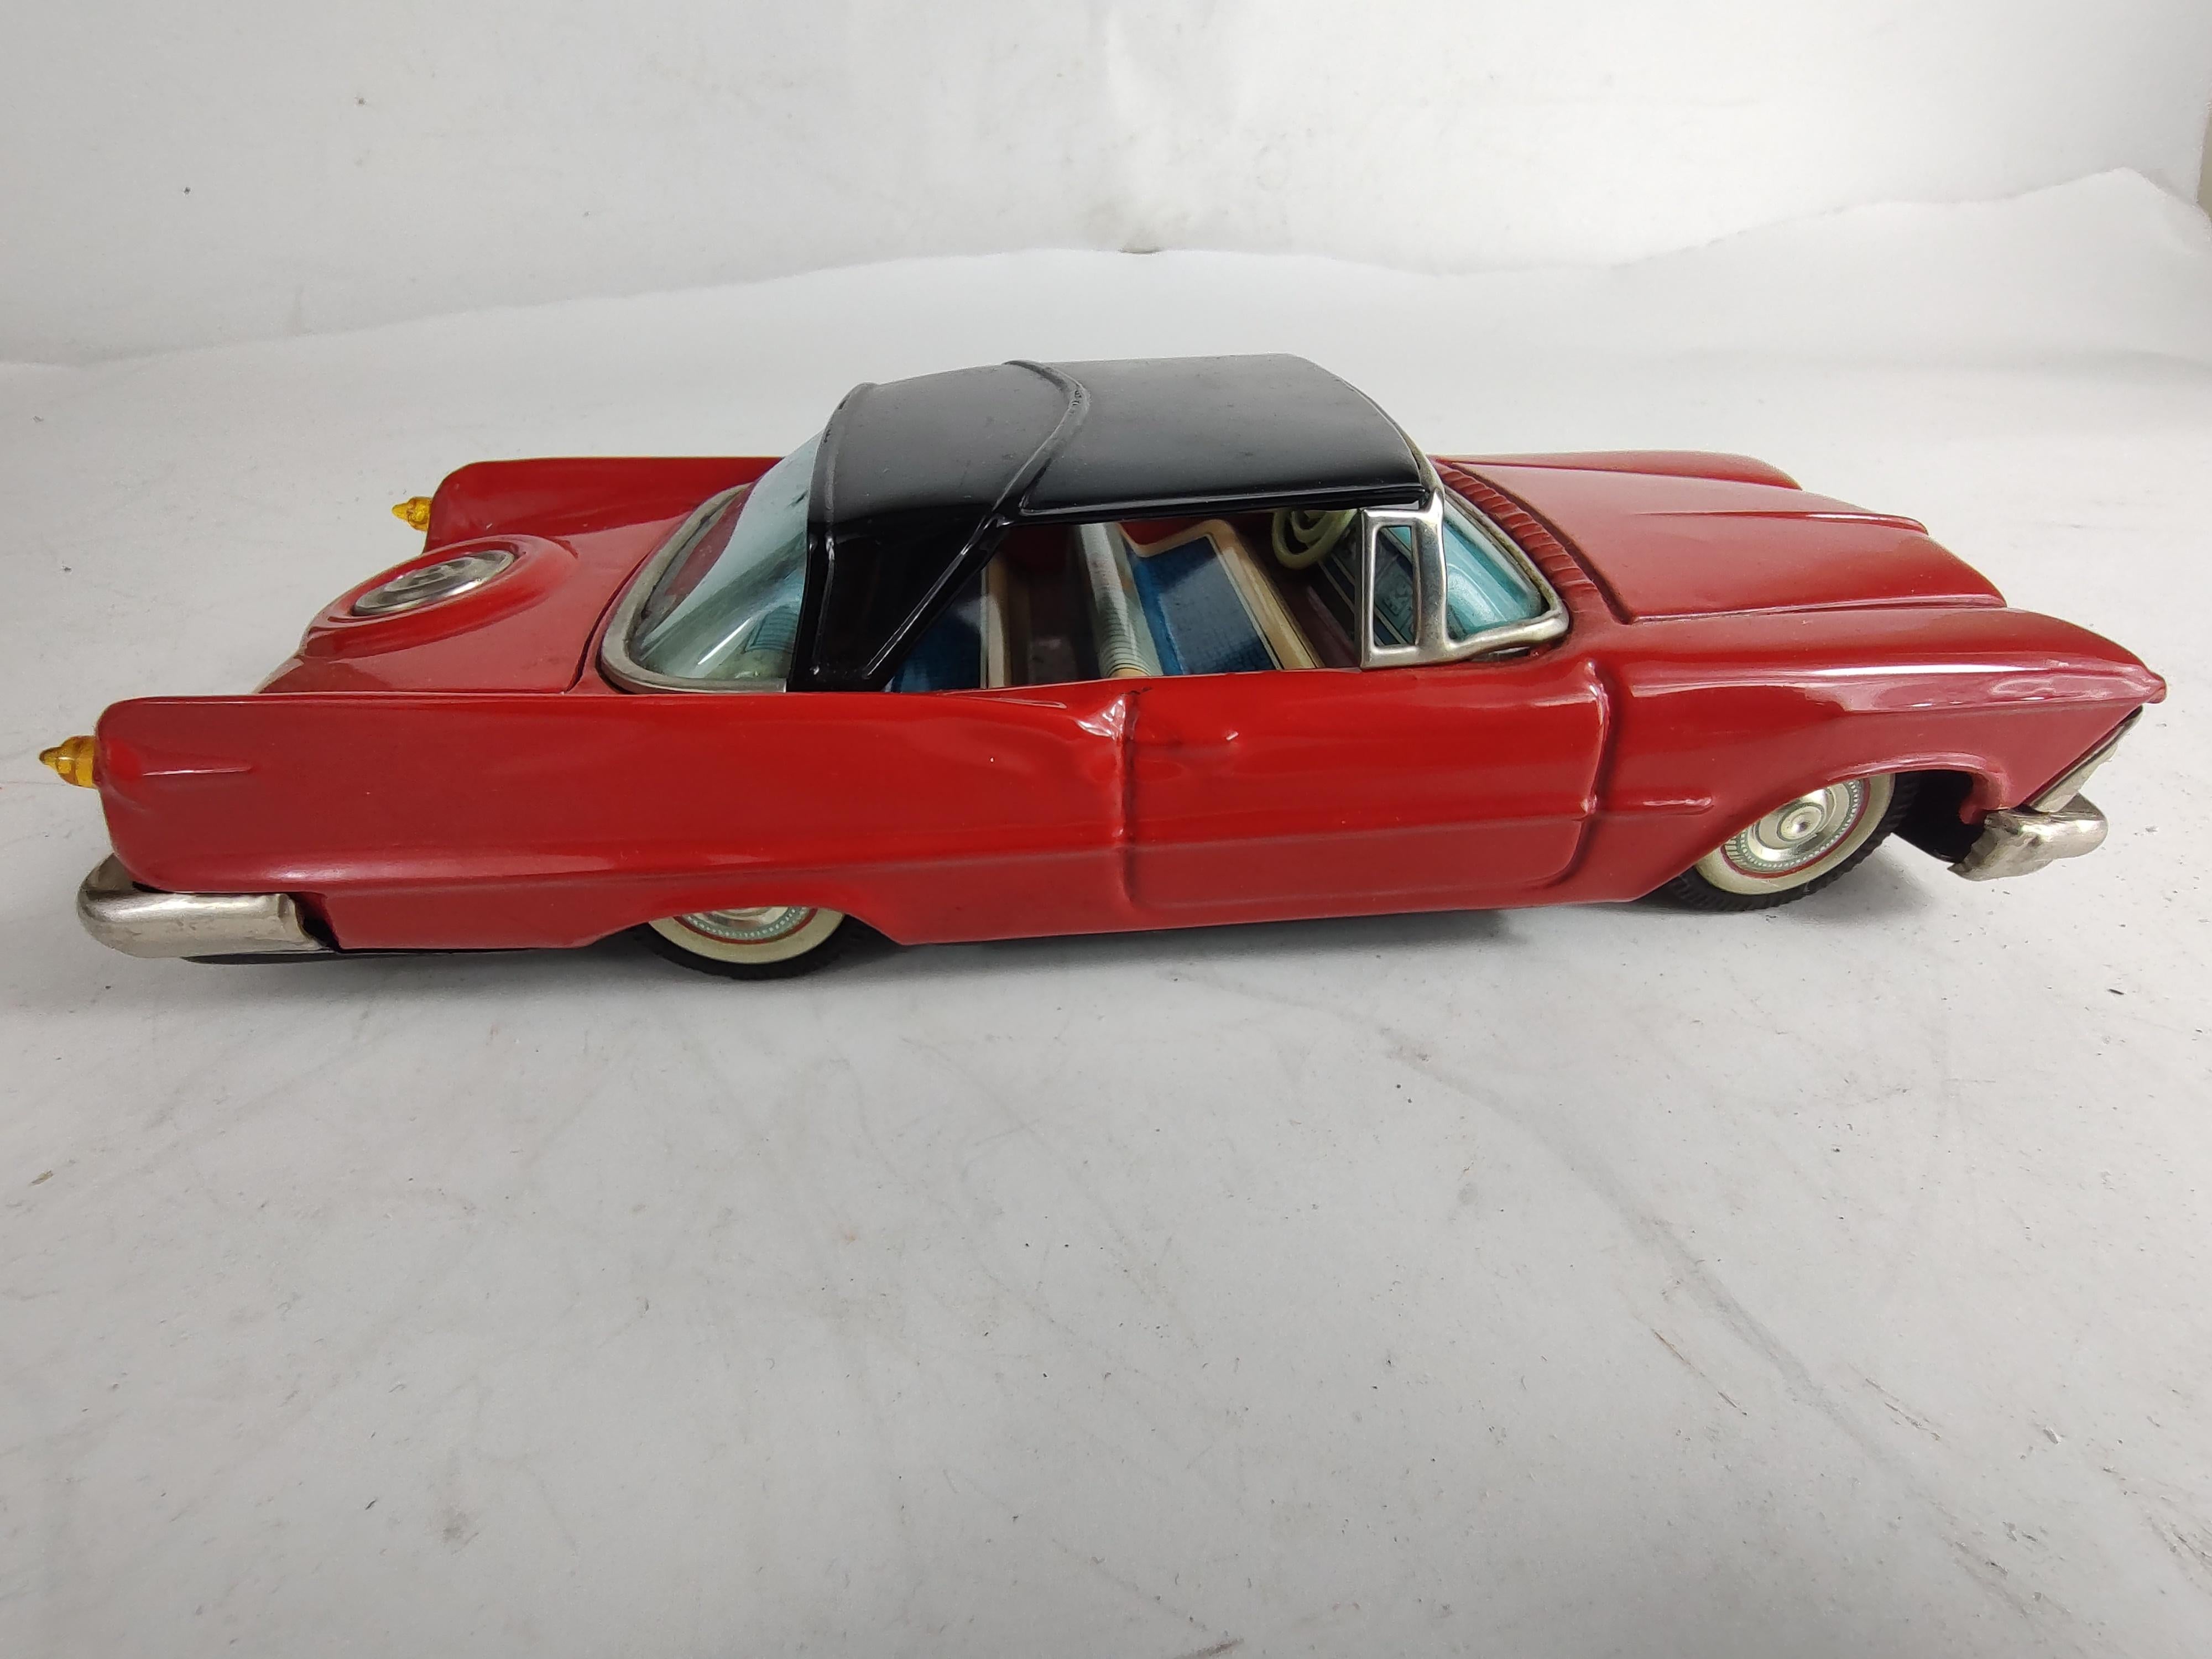 Midcentury Tin Litho Toy Car by Bandai Japan 1959 Chrysler Imperial in Red Black 2